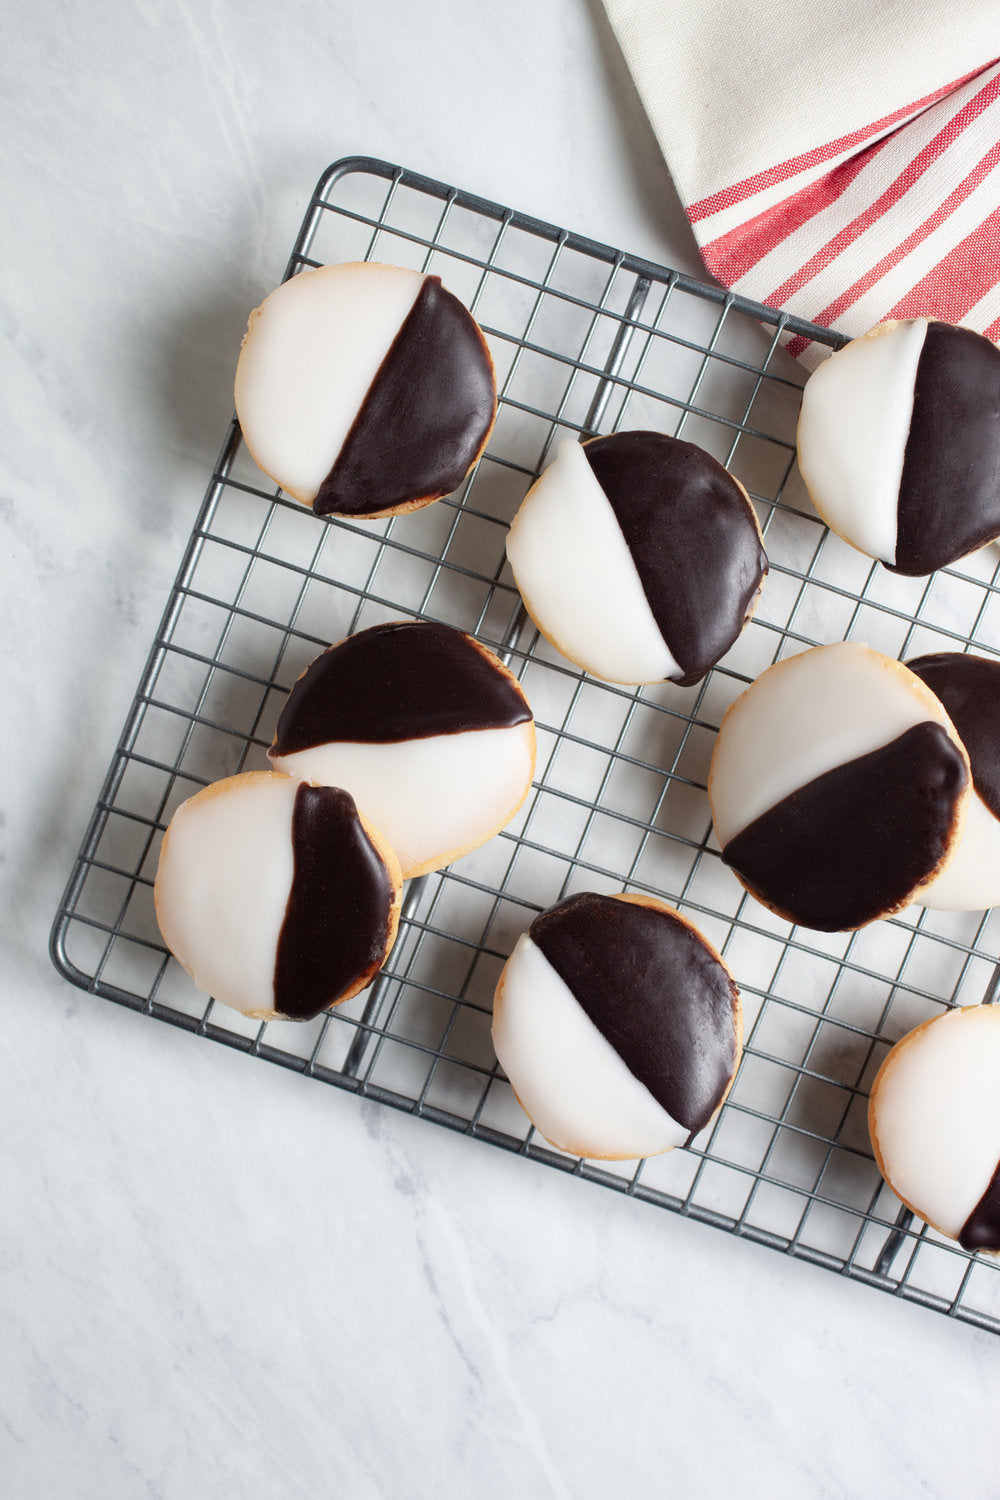 New Yorkers Aren’t the Only Ones Craving Our Iconic Black & White Cookies…